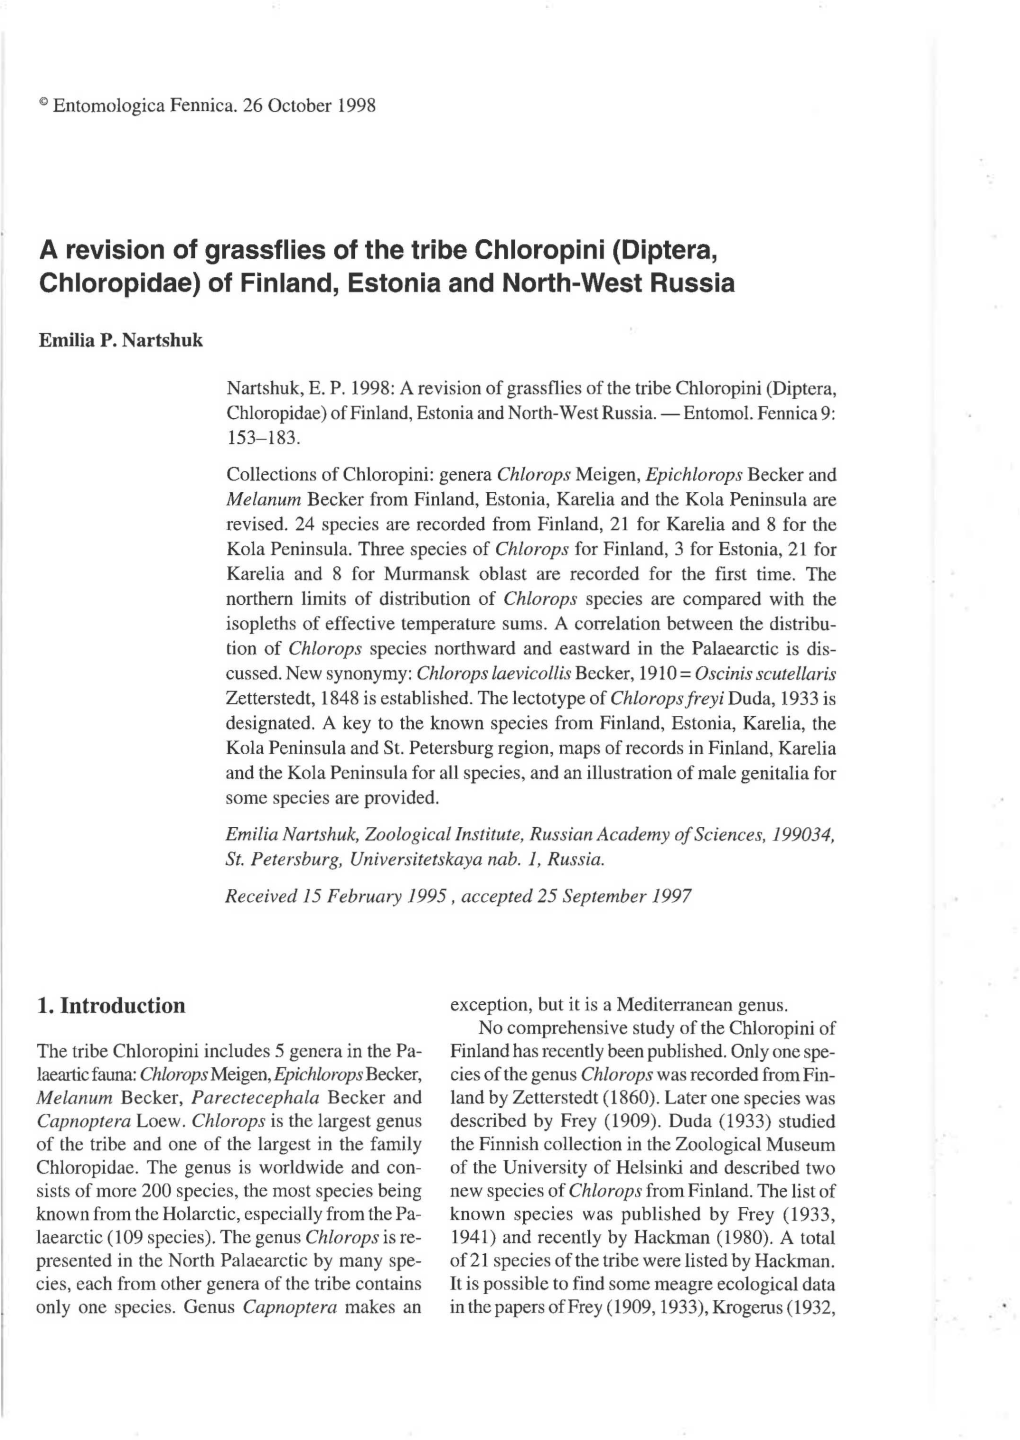 A Revision of Grassflies of the Tribe Chloropini (Diptera, Chloropidae) of Finland, Estonia and North-West Russia